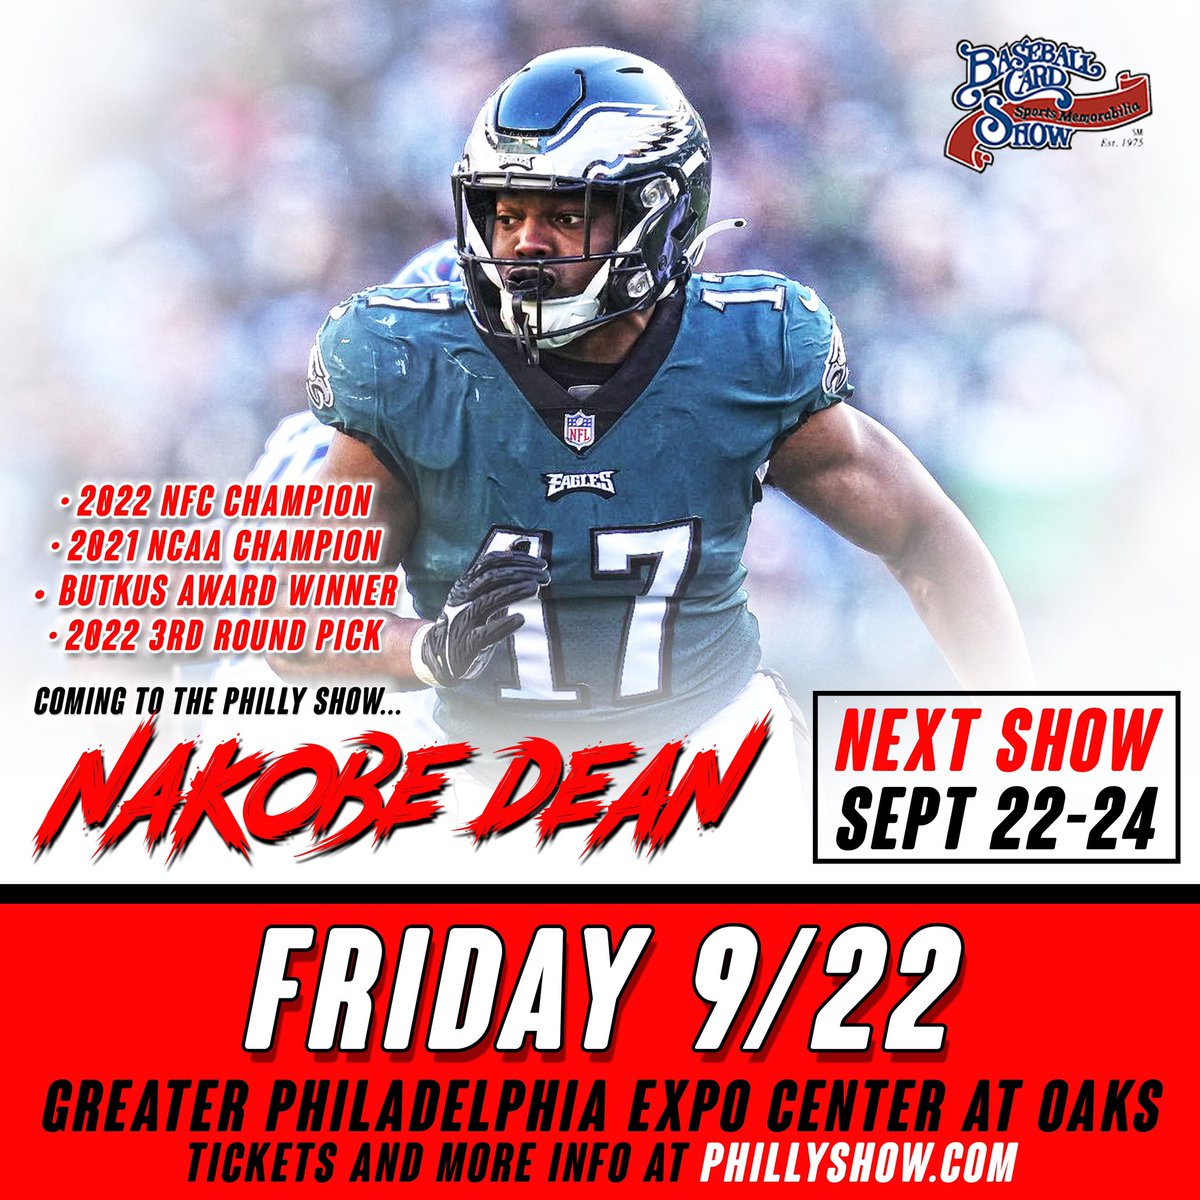 Look for Nakobe Dean at the September Philly Show! 

Still MORE to come!

phillyshow.com

#phillyfans #phillyshow #nfl #nakobedean #eagles #flyeaglesfly 
#autographs
#thephillyshow  #philadelphiaeagles 
#cardshow #vintagecards #sportscardcollector 
#sportscards